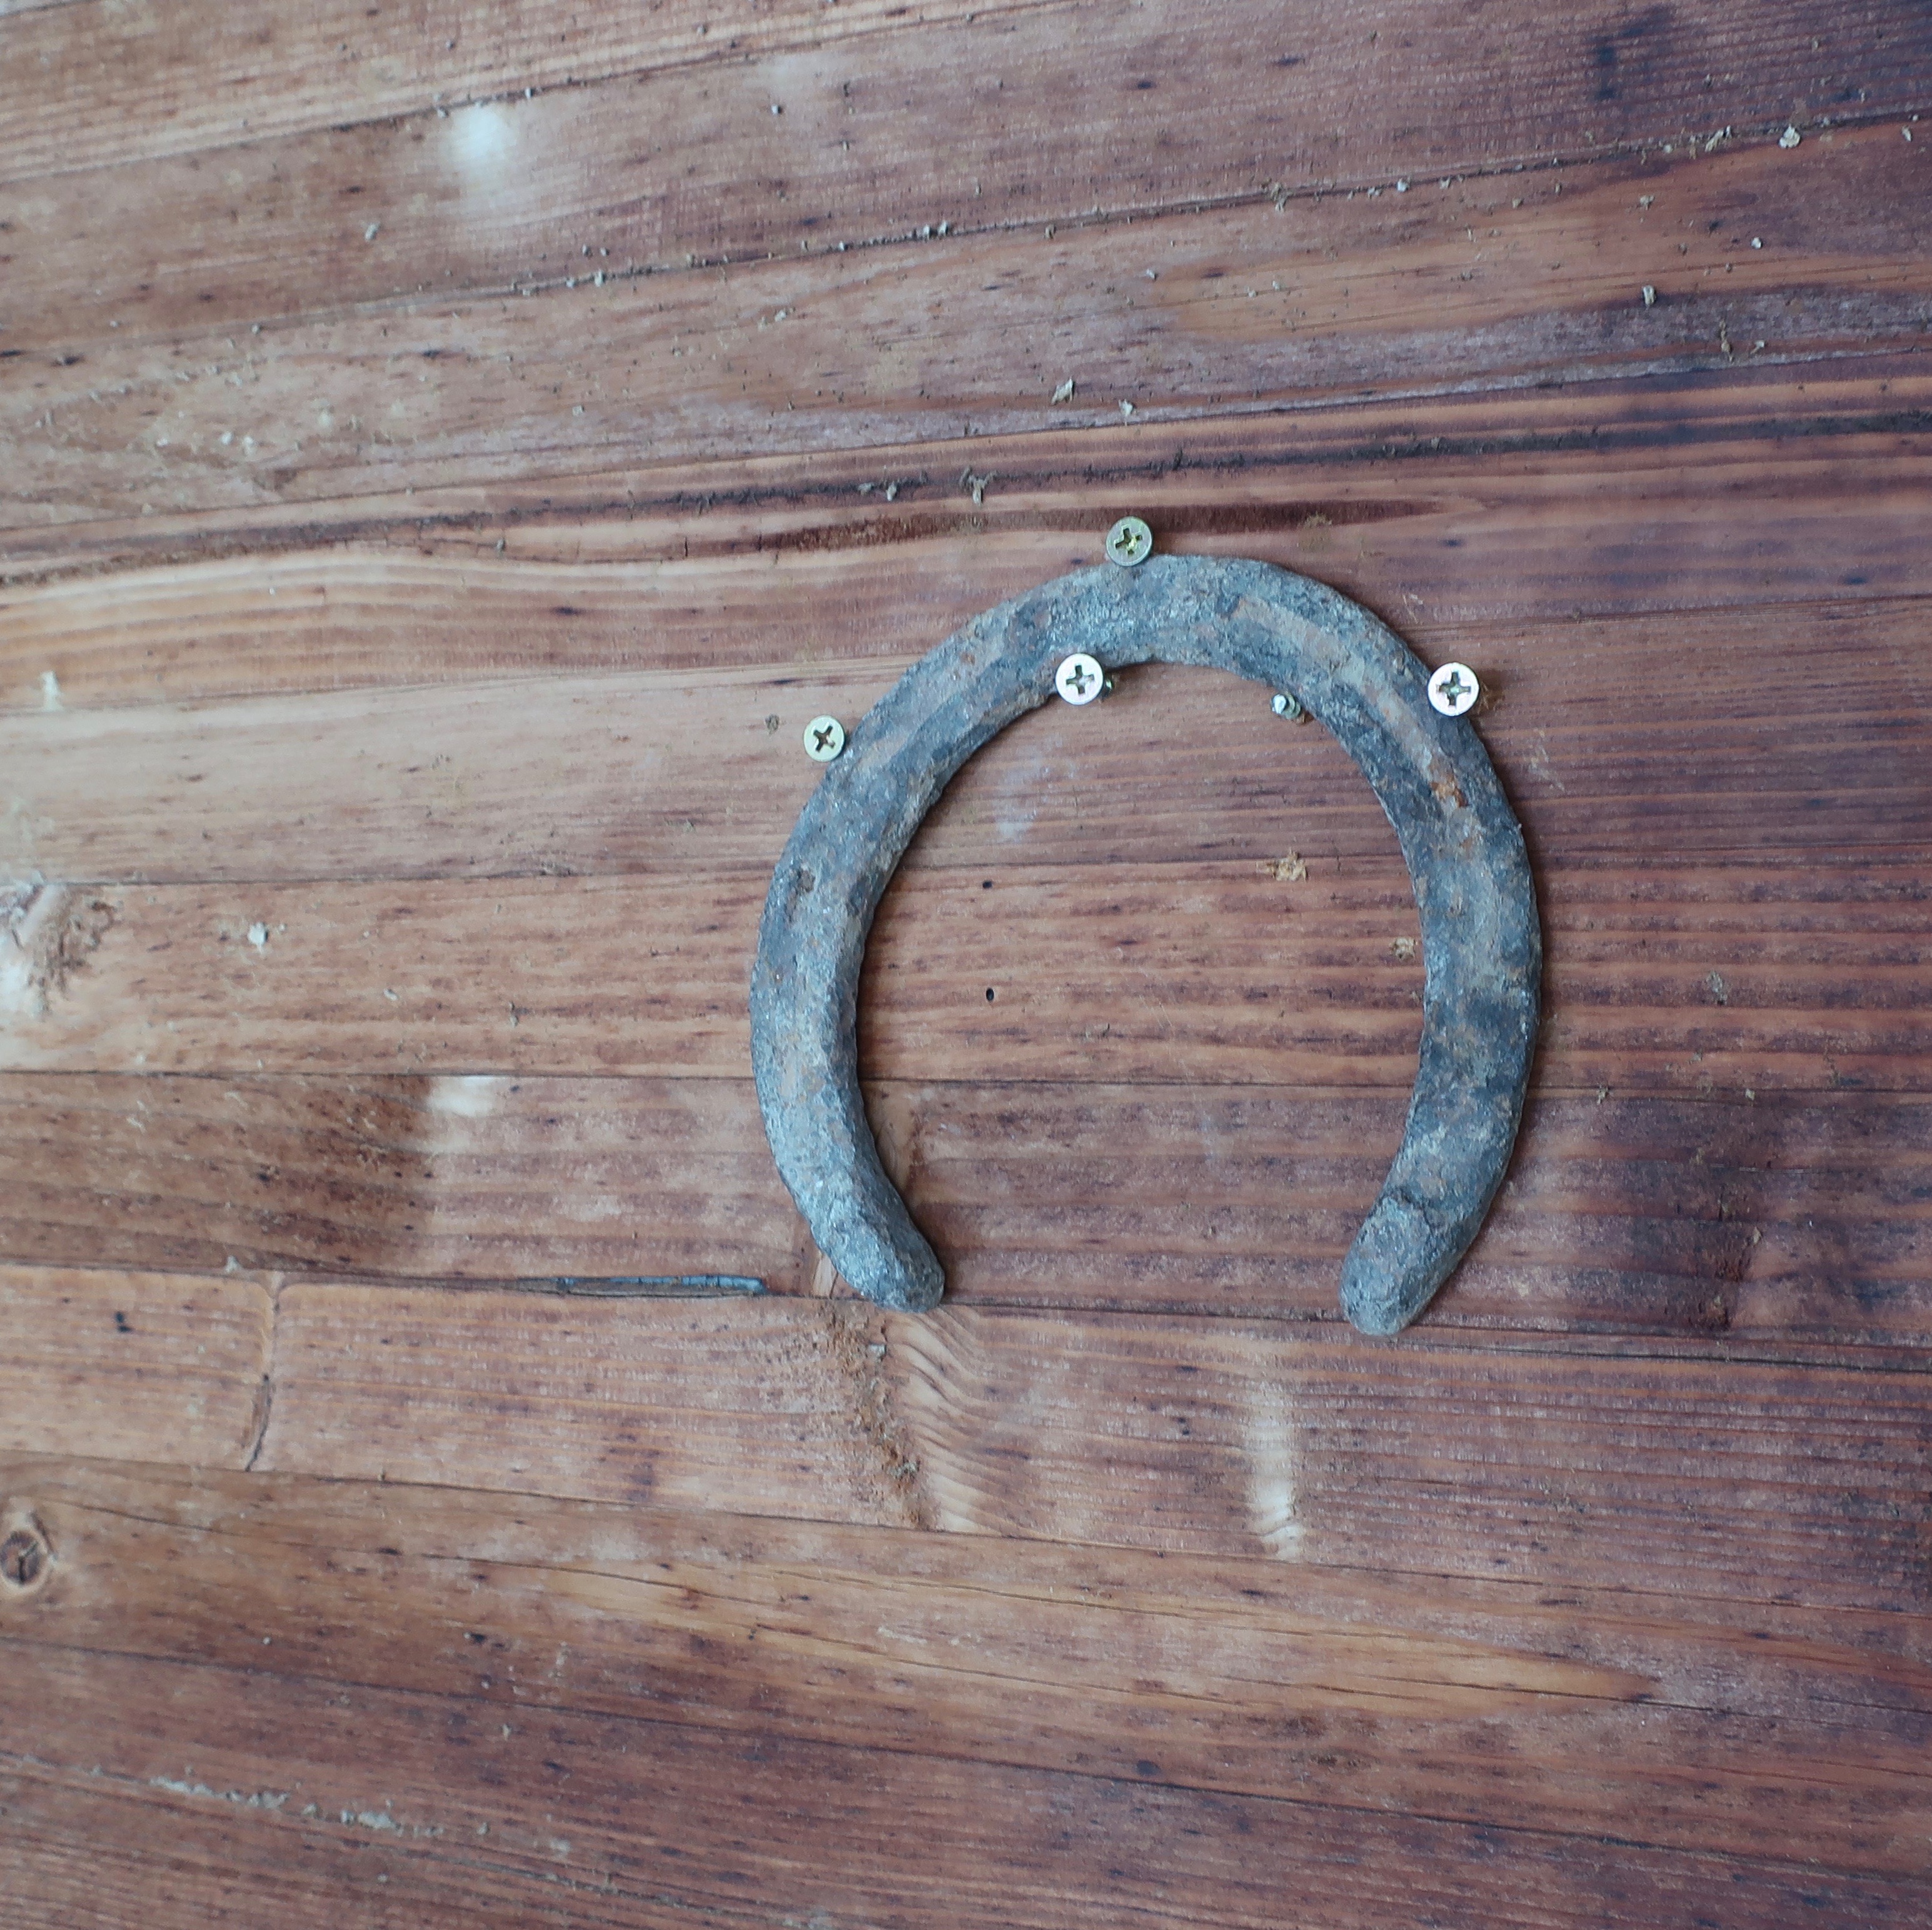 The lucky horseshoe remains at the remodeled Elysian Brewing - Capitol Hill.